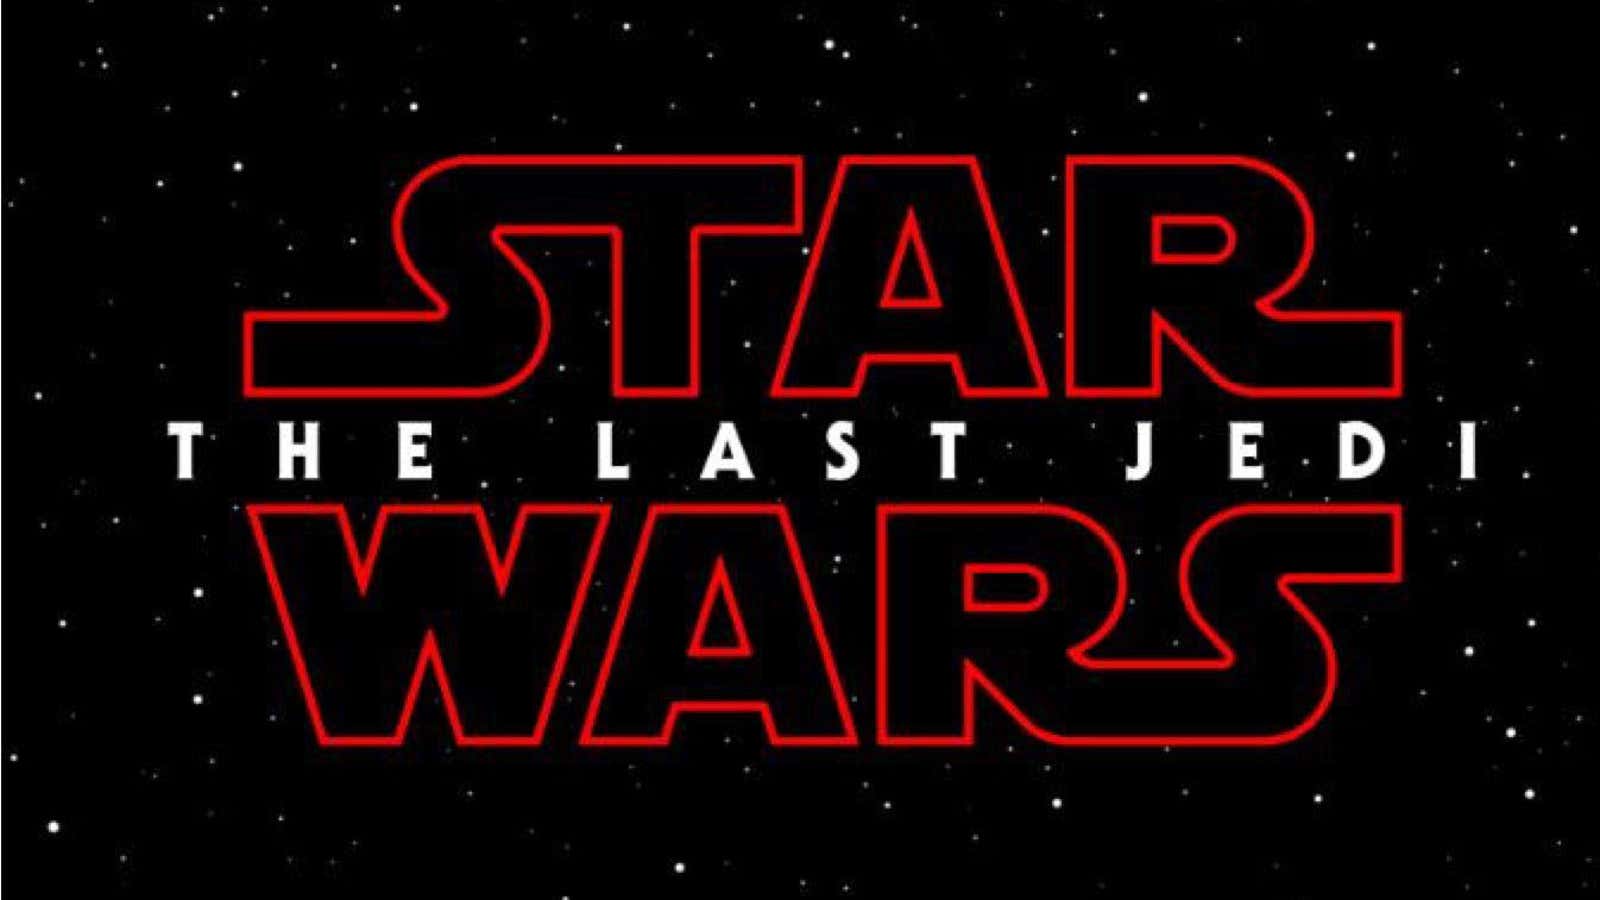 The second-to-last Star Wars title.